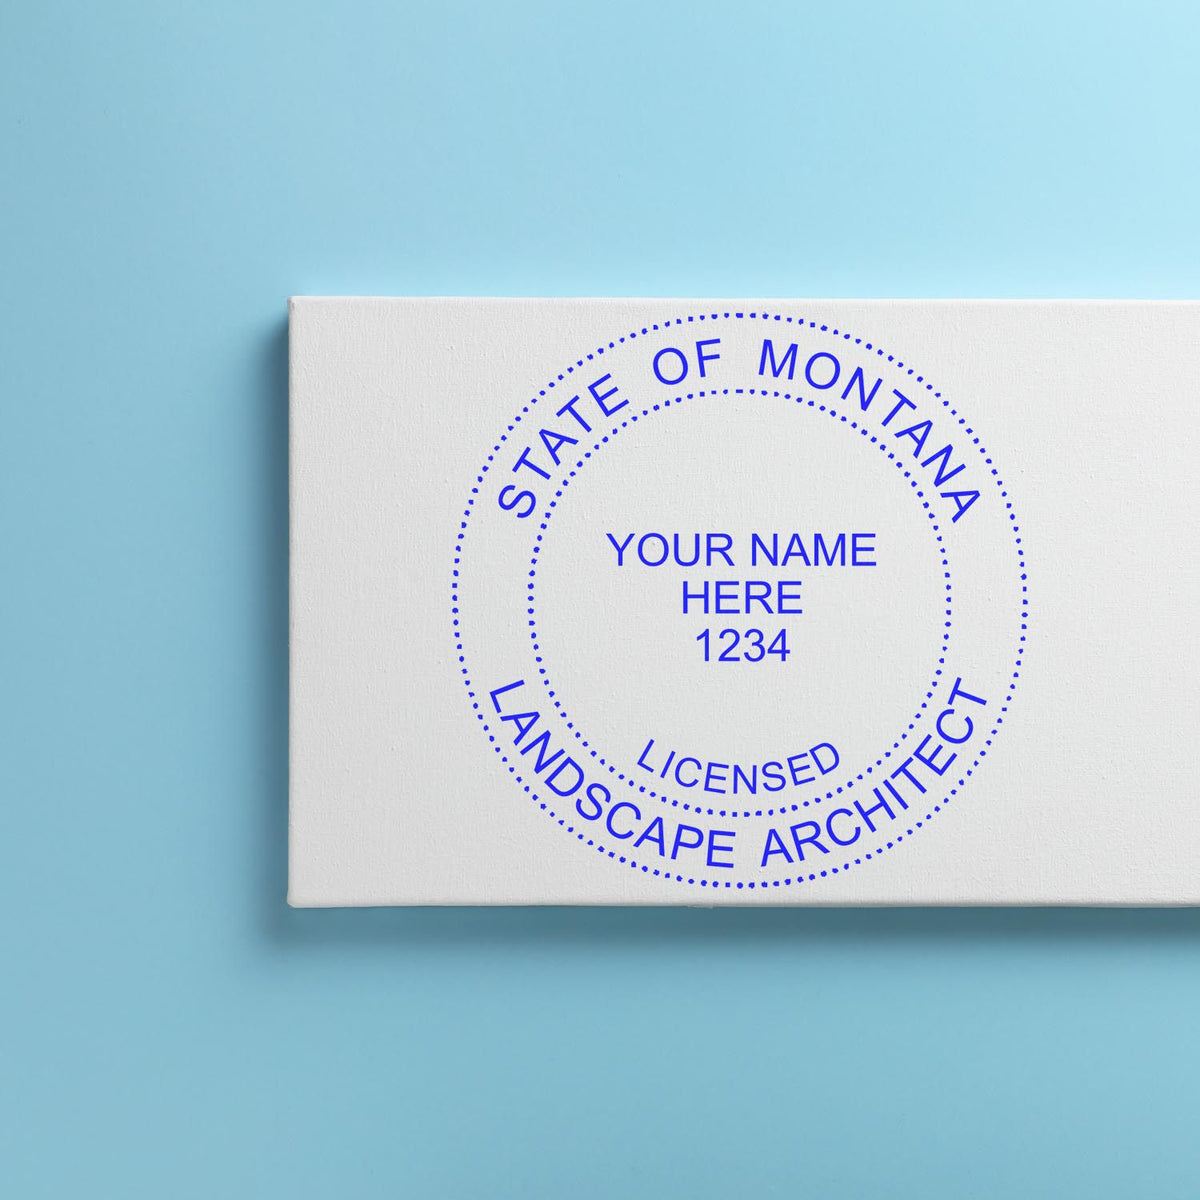 This paper is stamped with a sample imprint of the Self-Inking Montana Landscape Architect Stamp, signifying its quality and reliability.